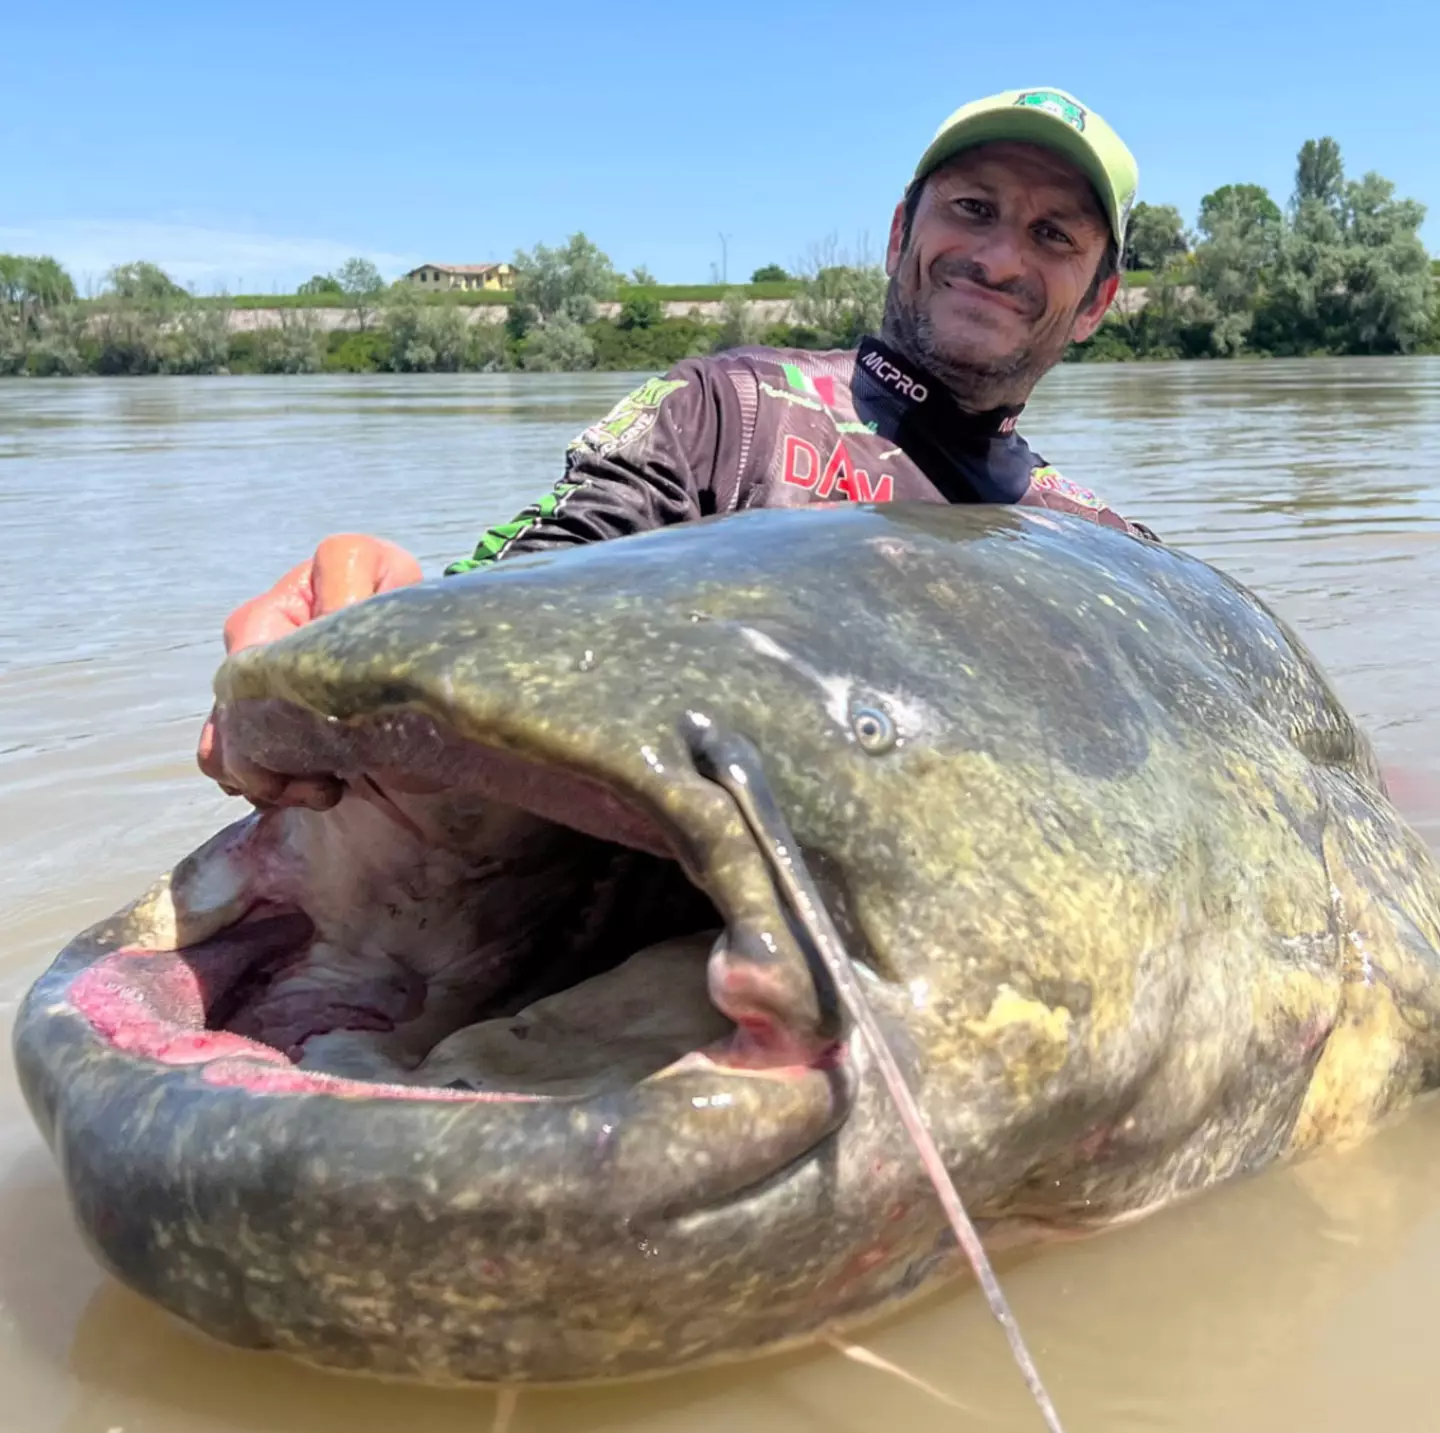 Allessandro Biancardi caught a huge catfish in Italy.